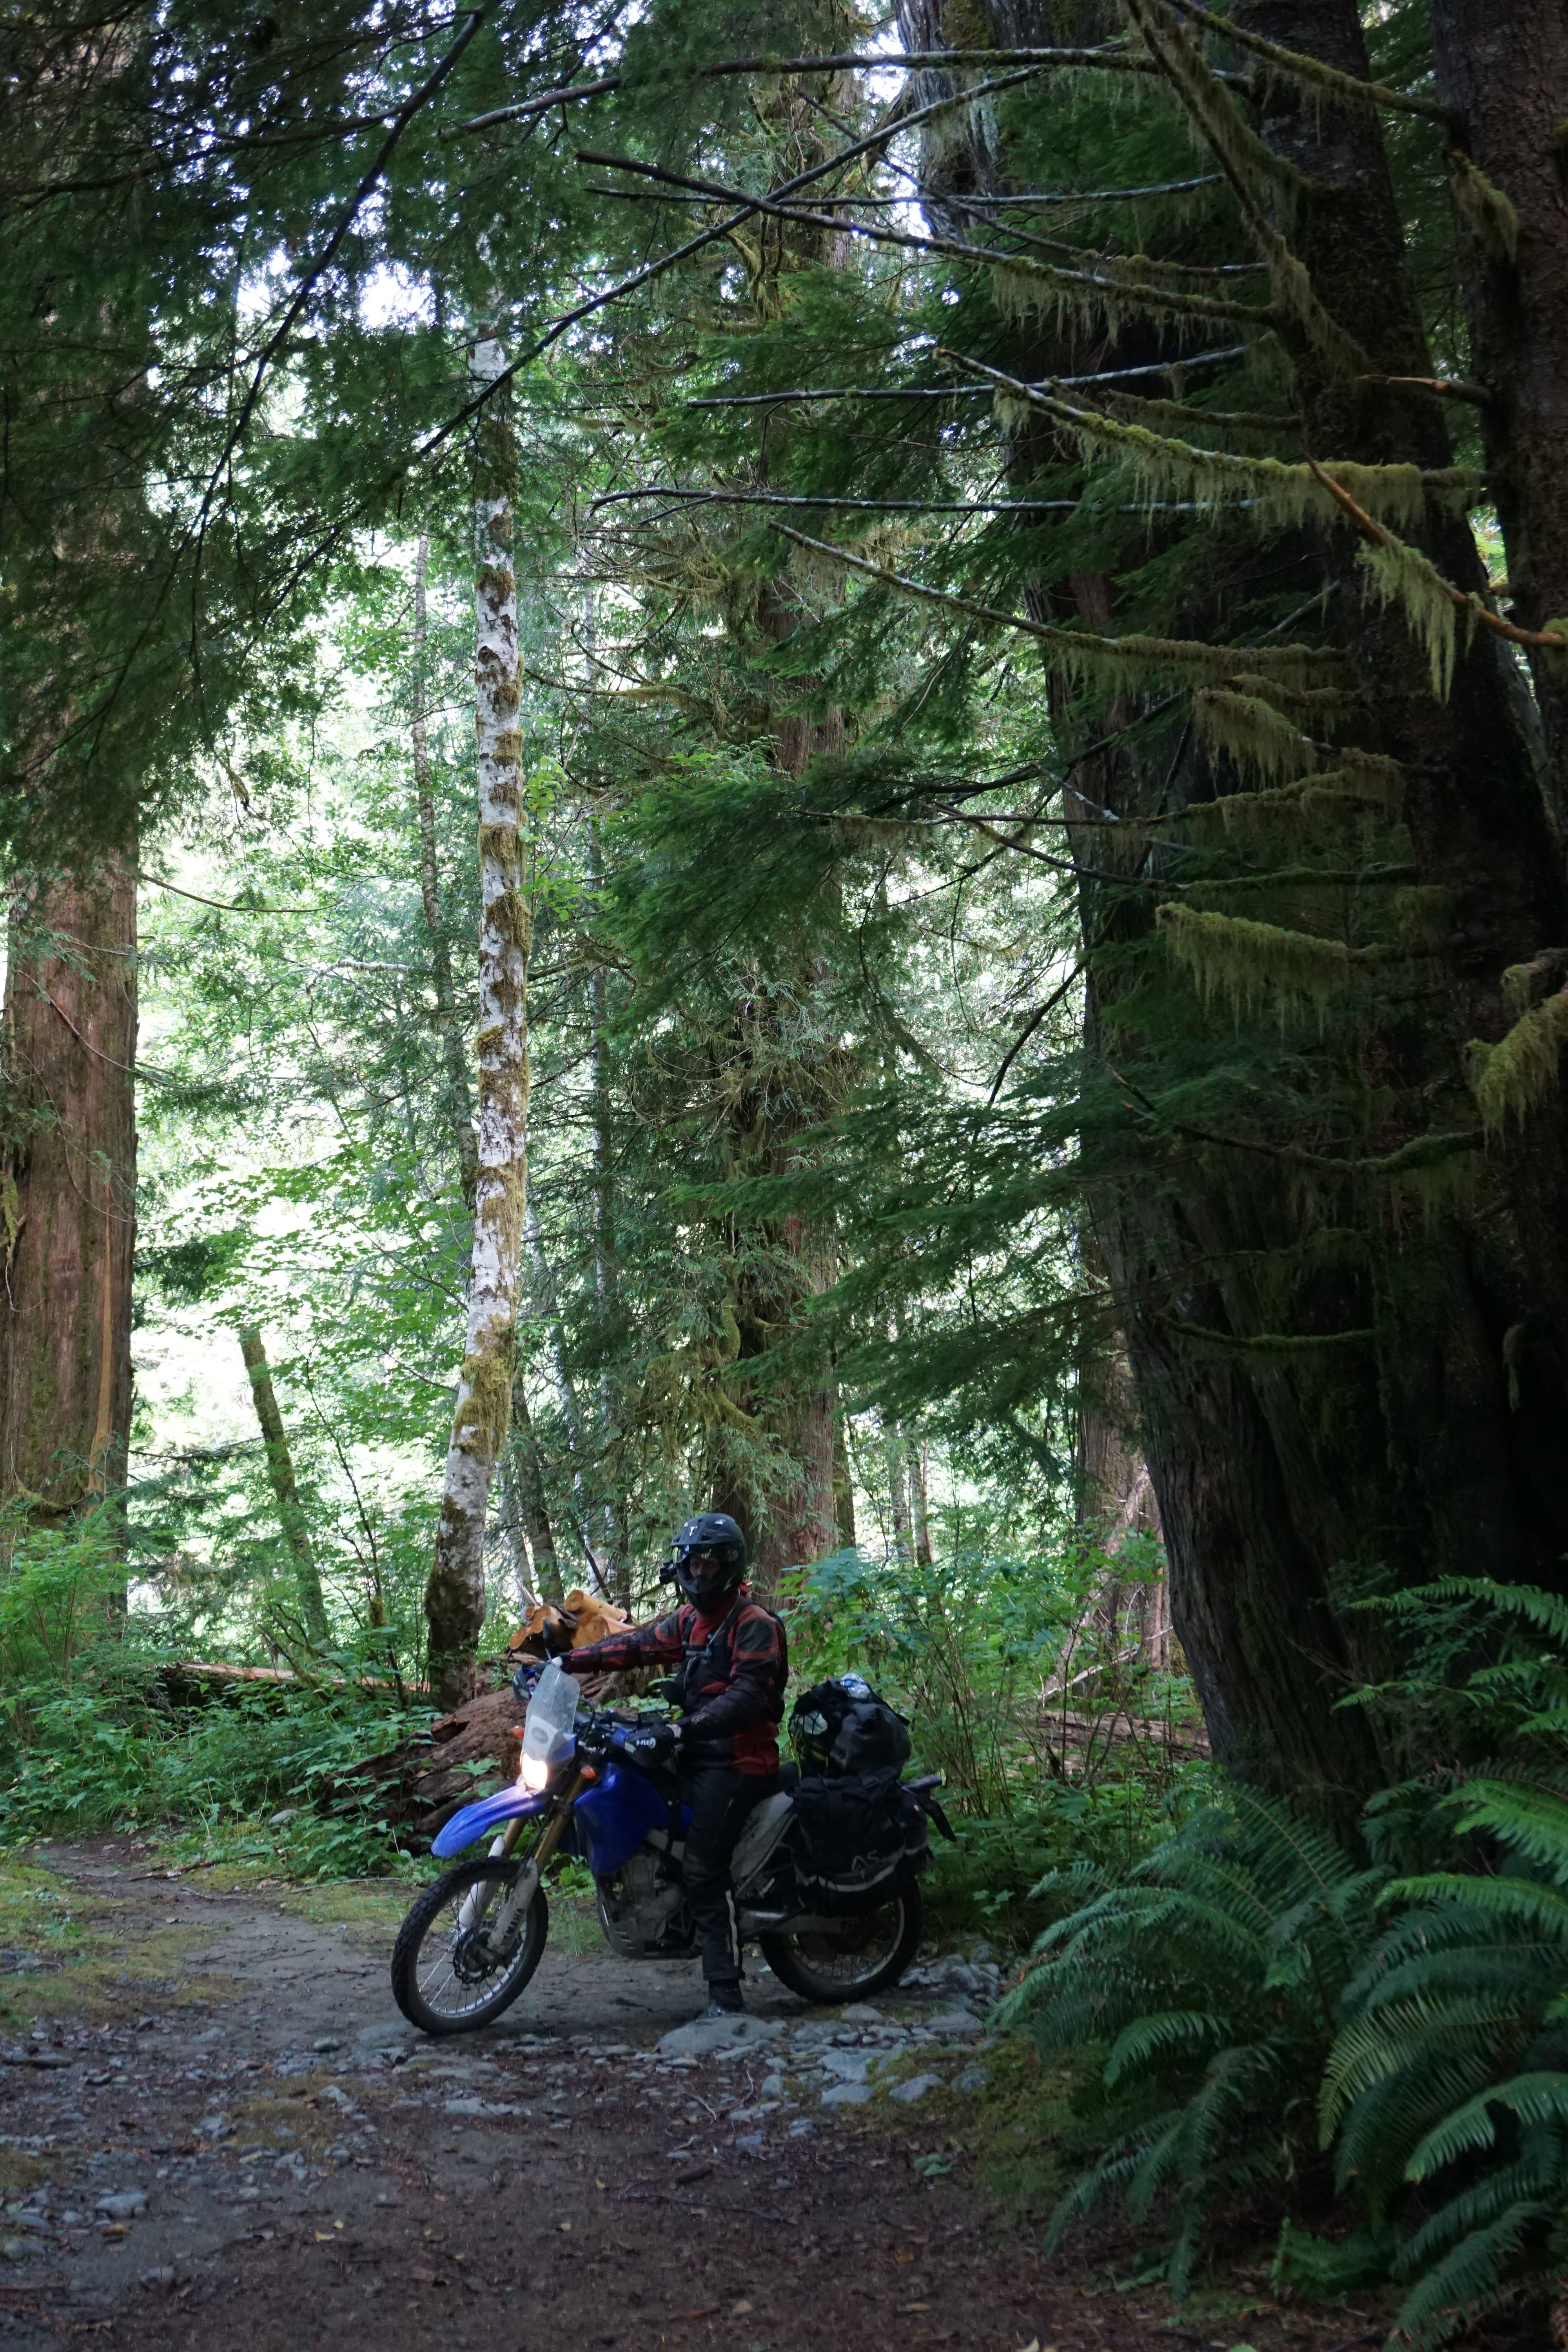 Riding through the forest of ancient cedar trees